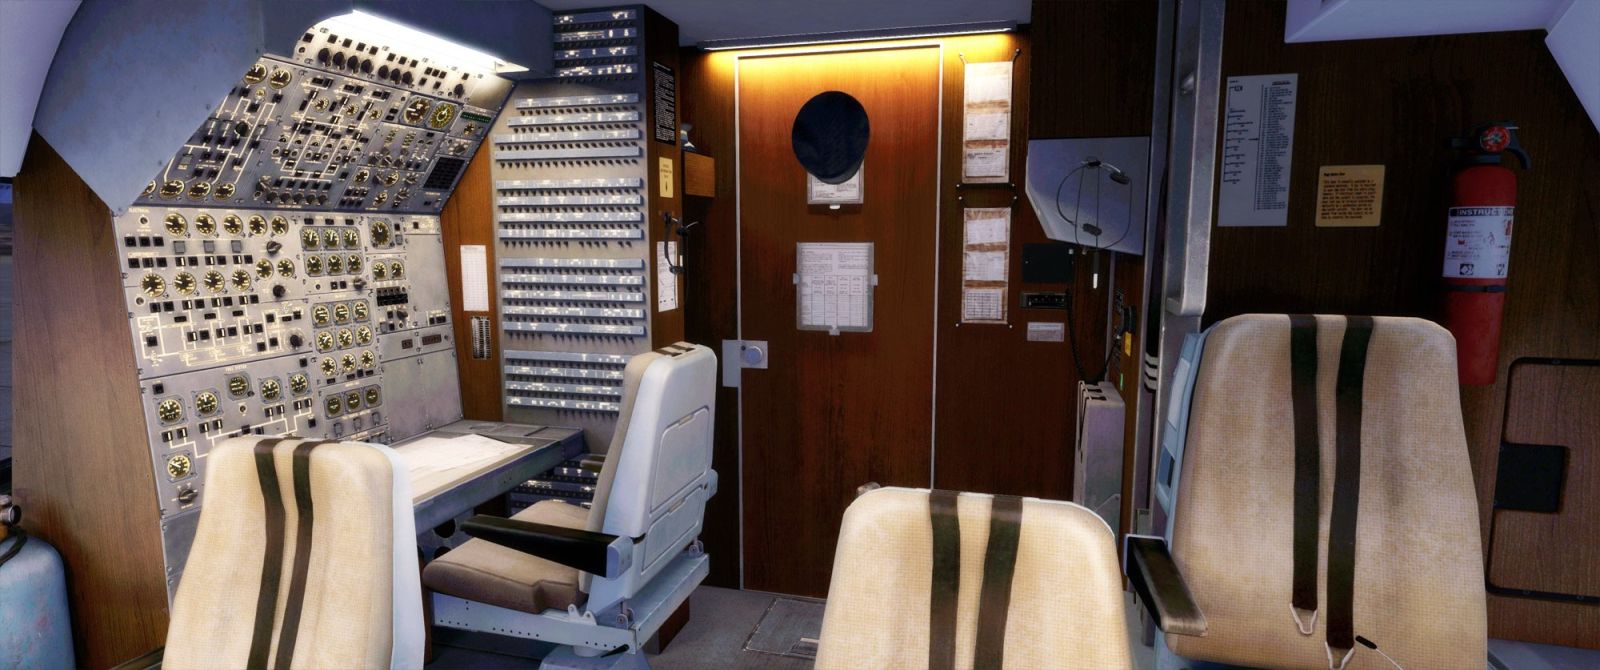 Captain Sim L-1011 Tristar, pulled from their website